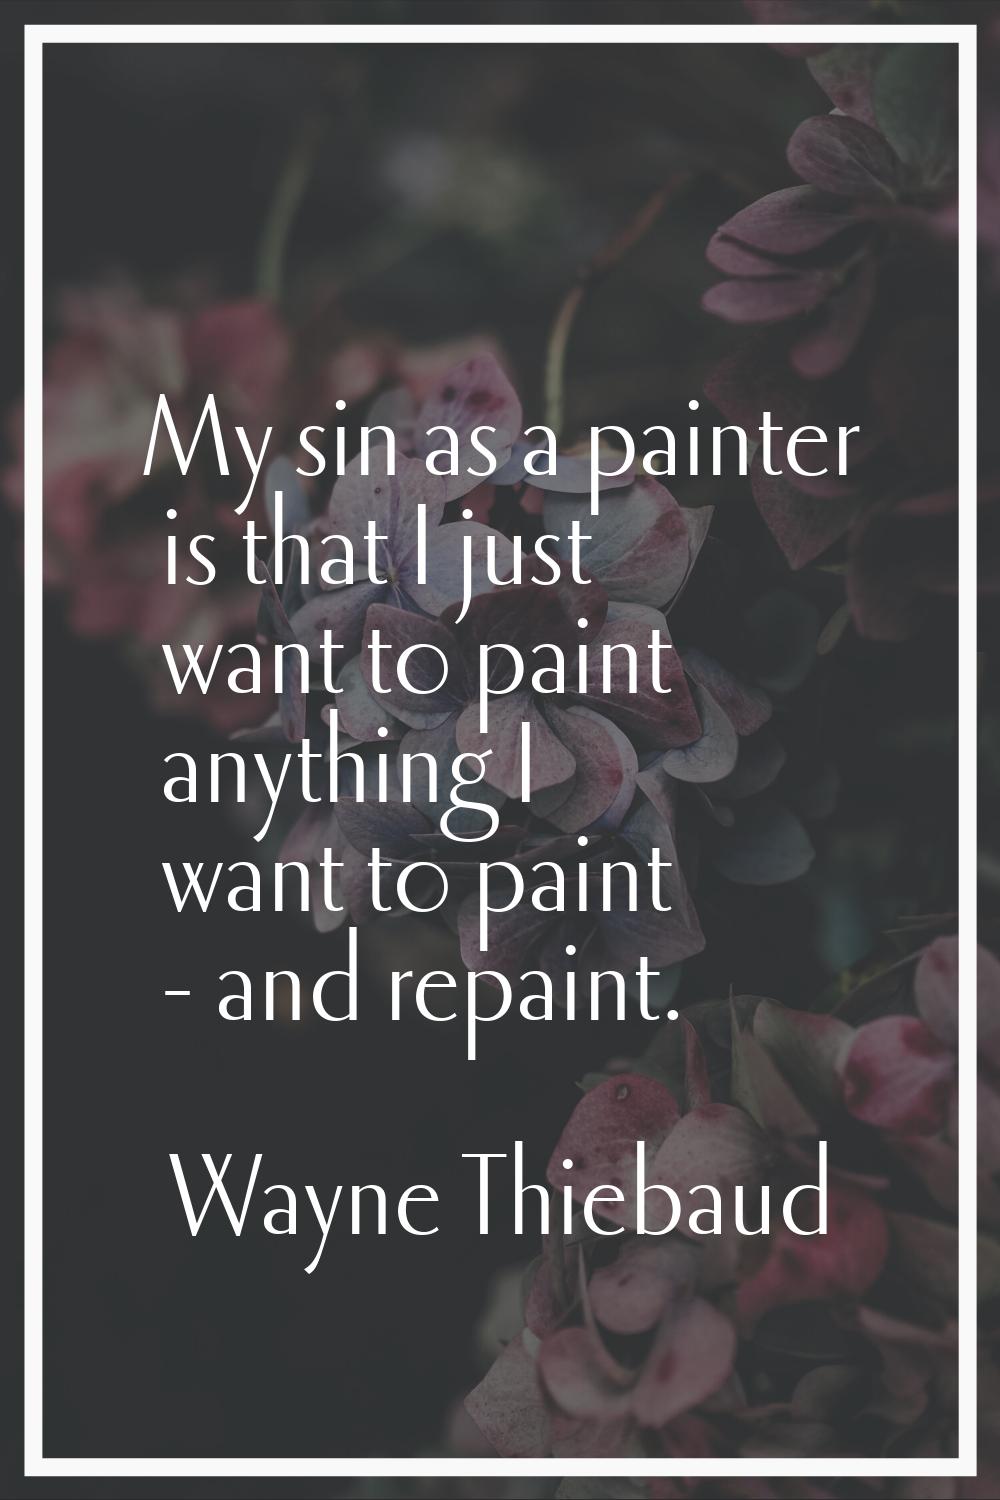 My sin as a painter is that I just want to paint anything I want to paint - and repaint.